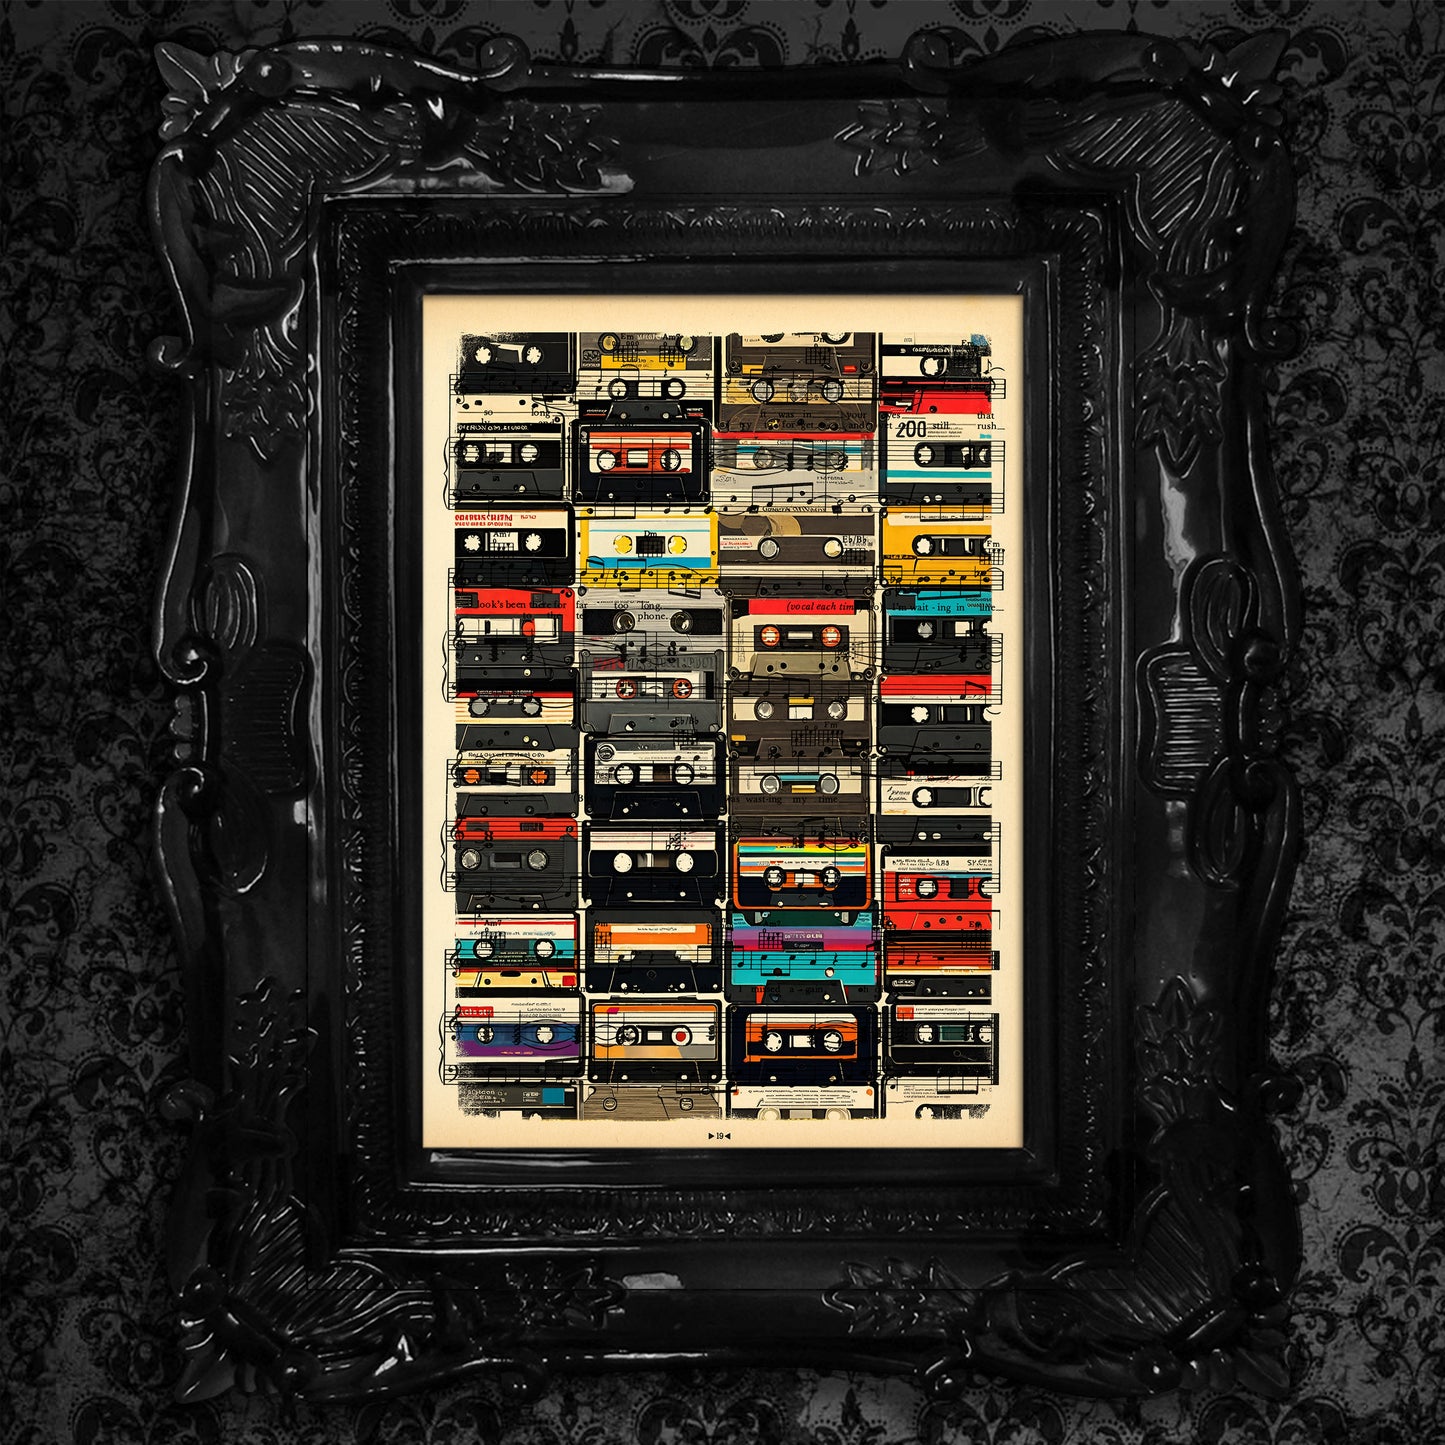 Limited edition Retro Audio HiFi series print with cassette tapes and synthesizers on old music book pages.